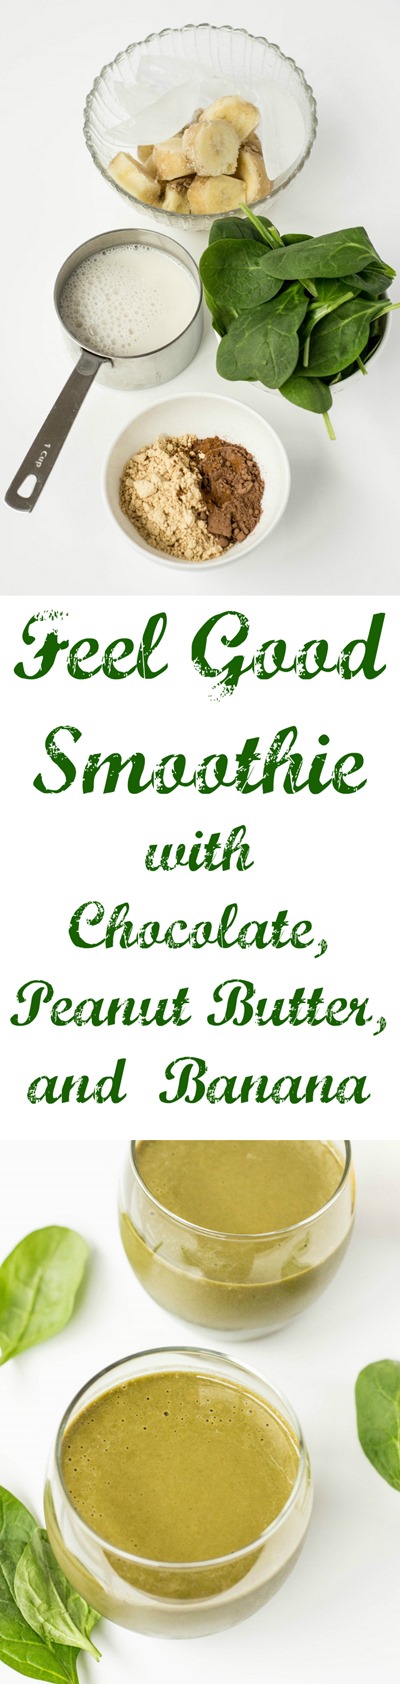 Chocolate Peanut Butter Banana Smoothie- so healthy and SO good! #ad